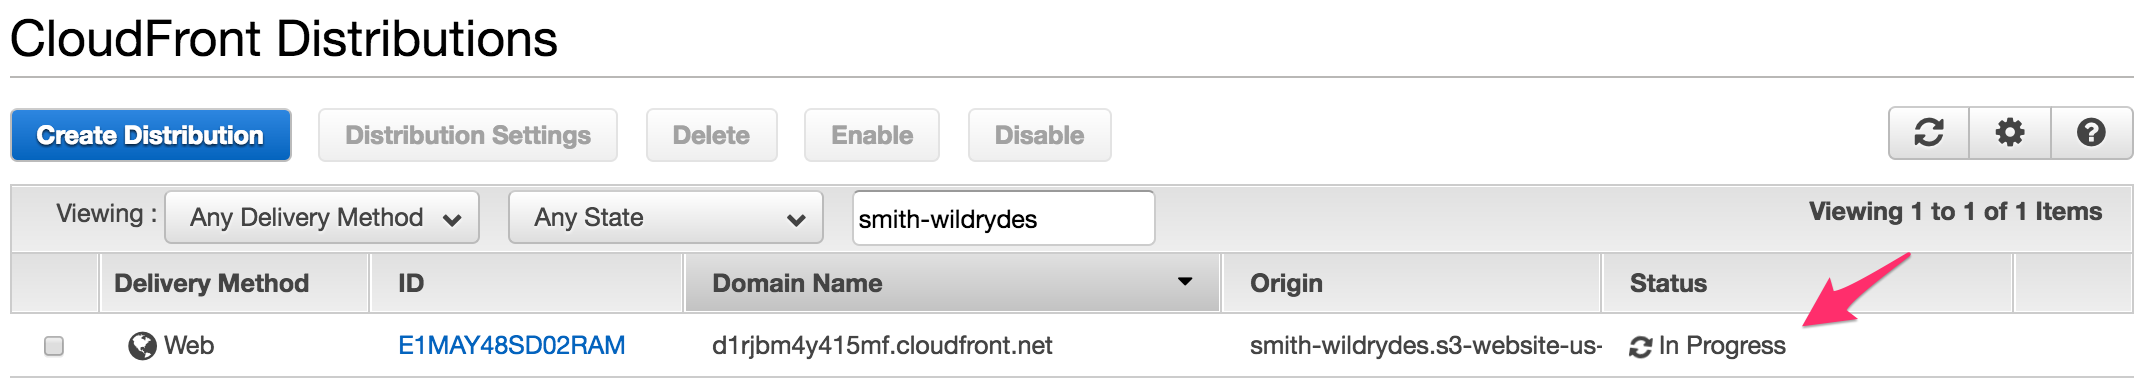 CloudFront distributions